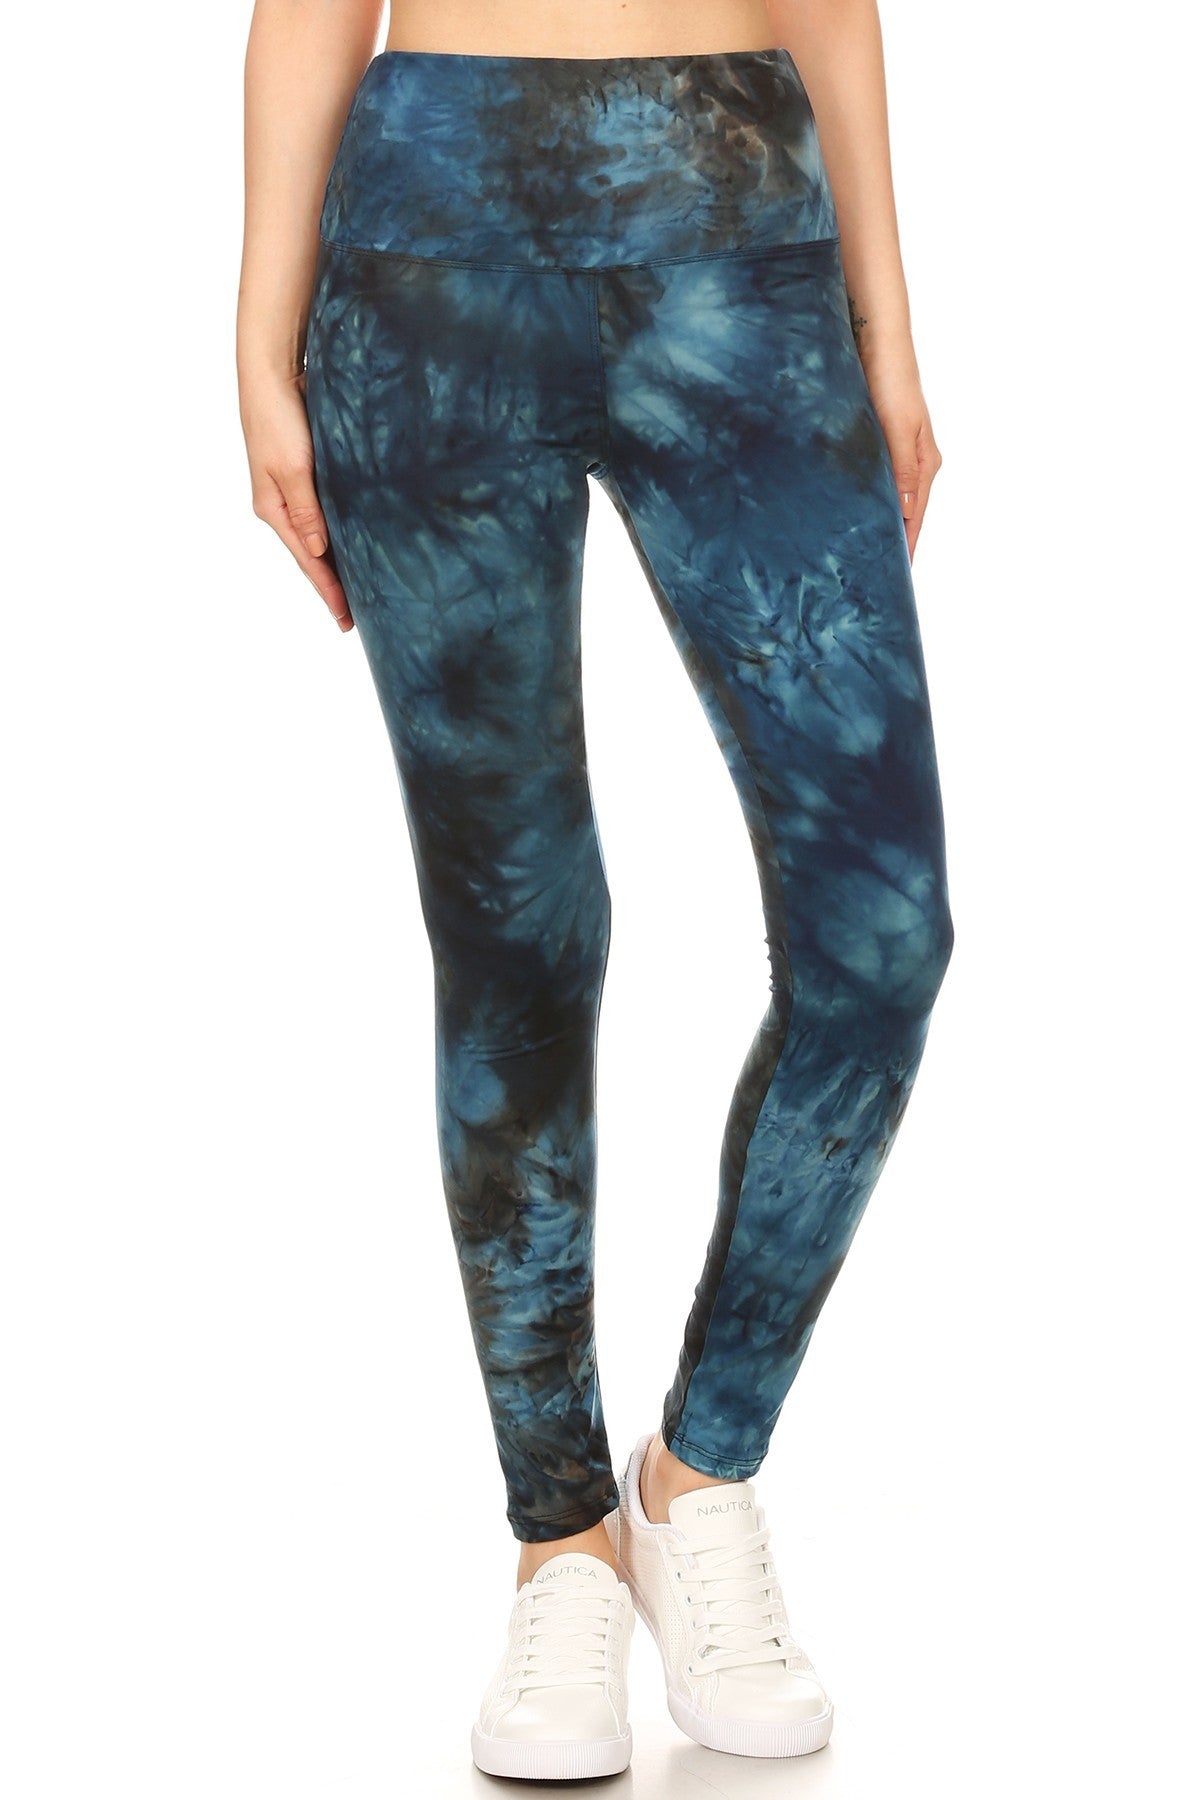 Relax Time Tie Dye Printed Knit Legging With High Waist